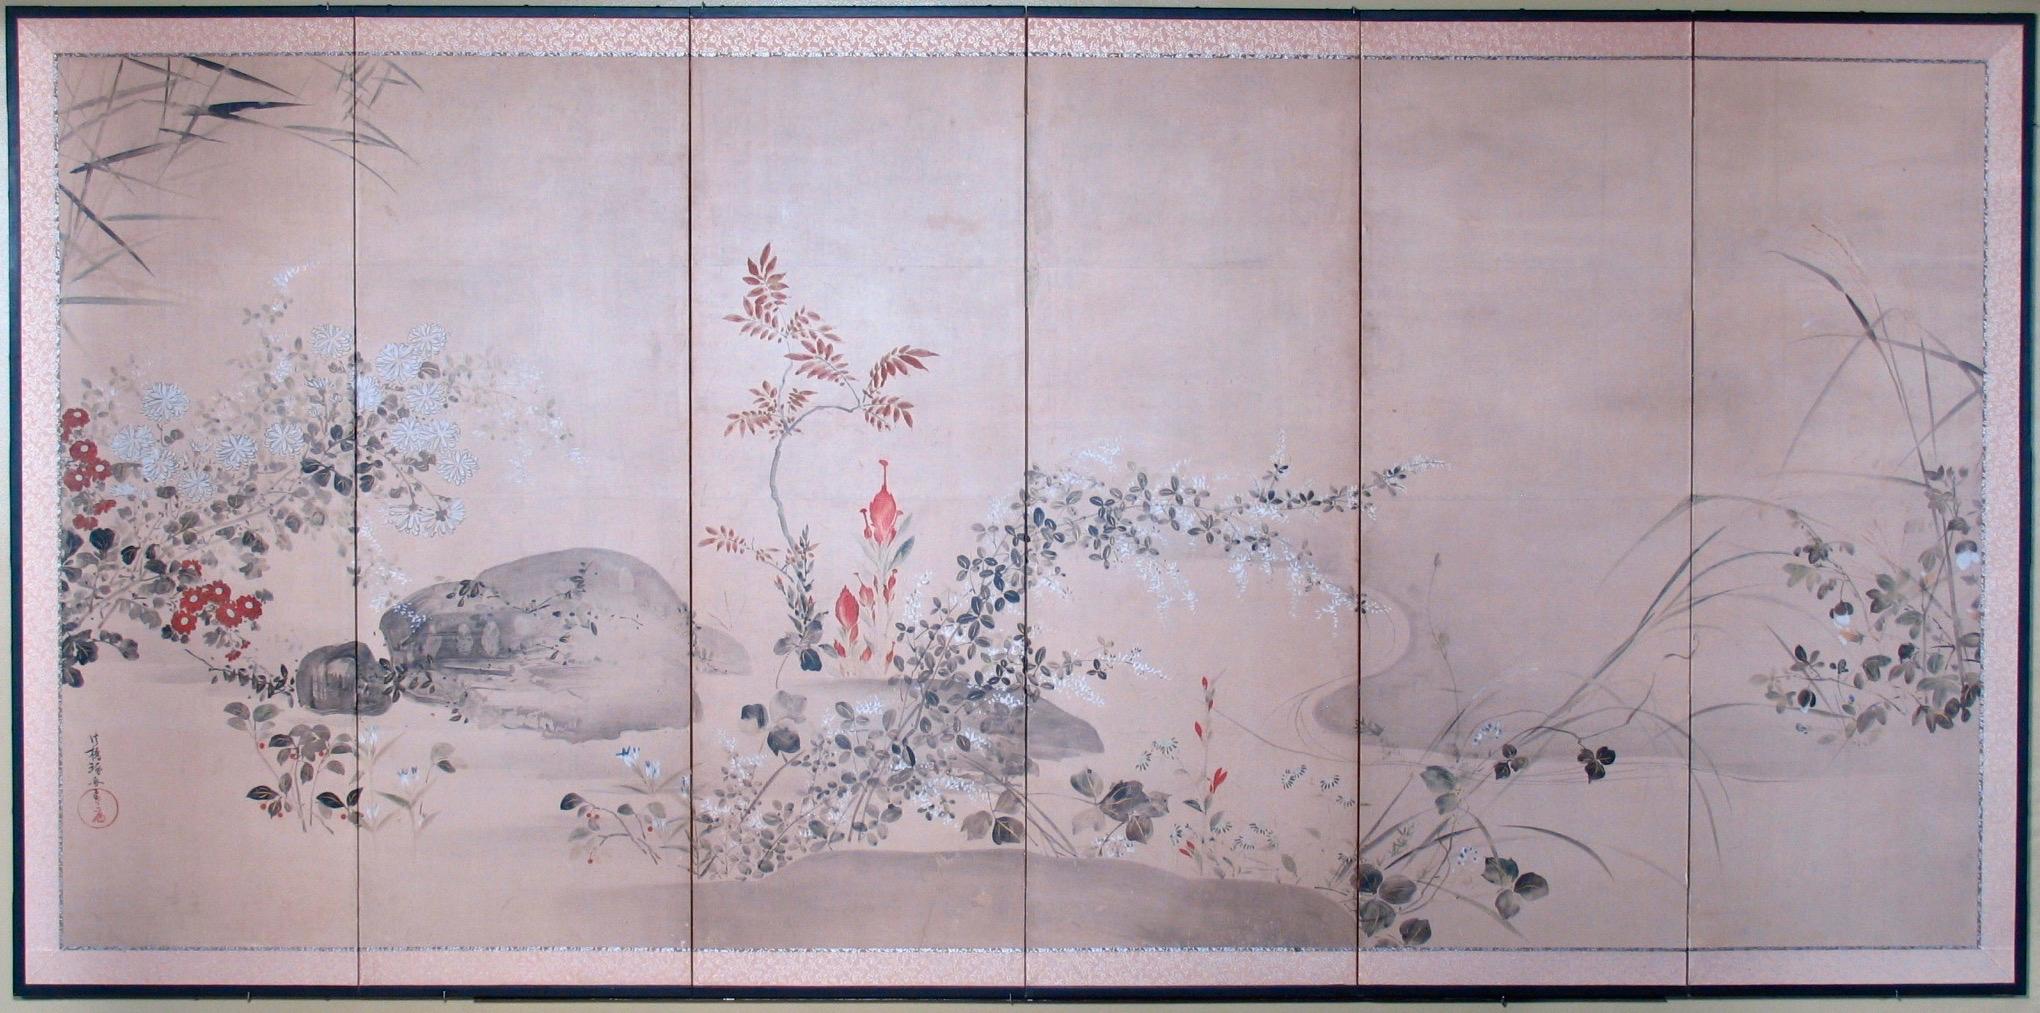 Antique Japanese Rimpa style 6-panel screen, featuring spring and autumn foliage on the banks of a meandering stream with a clump of red and white blossoming chrysanthemum extending over a small group or eroded rocks bordered by further flowering